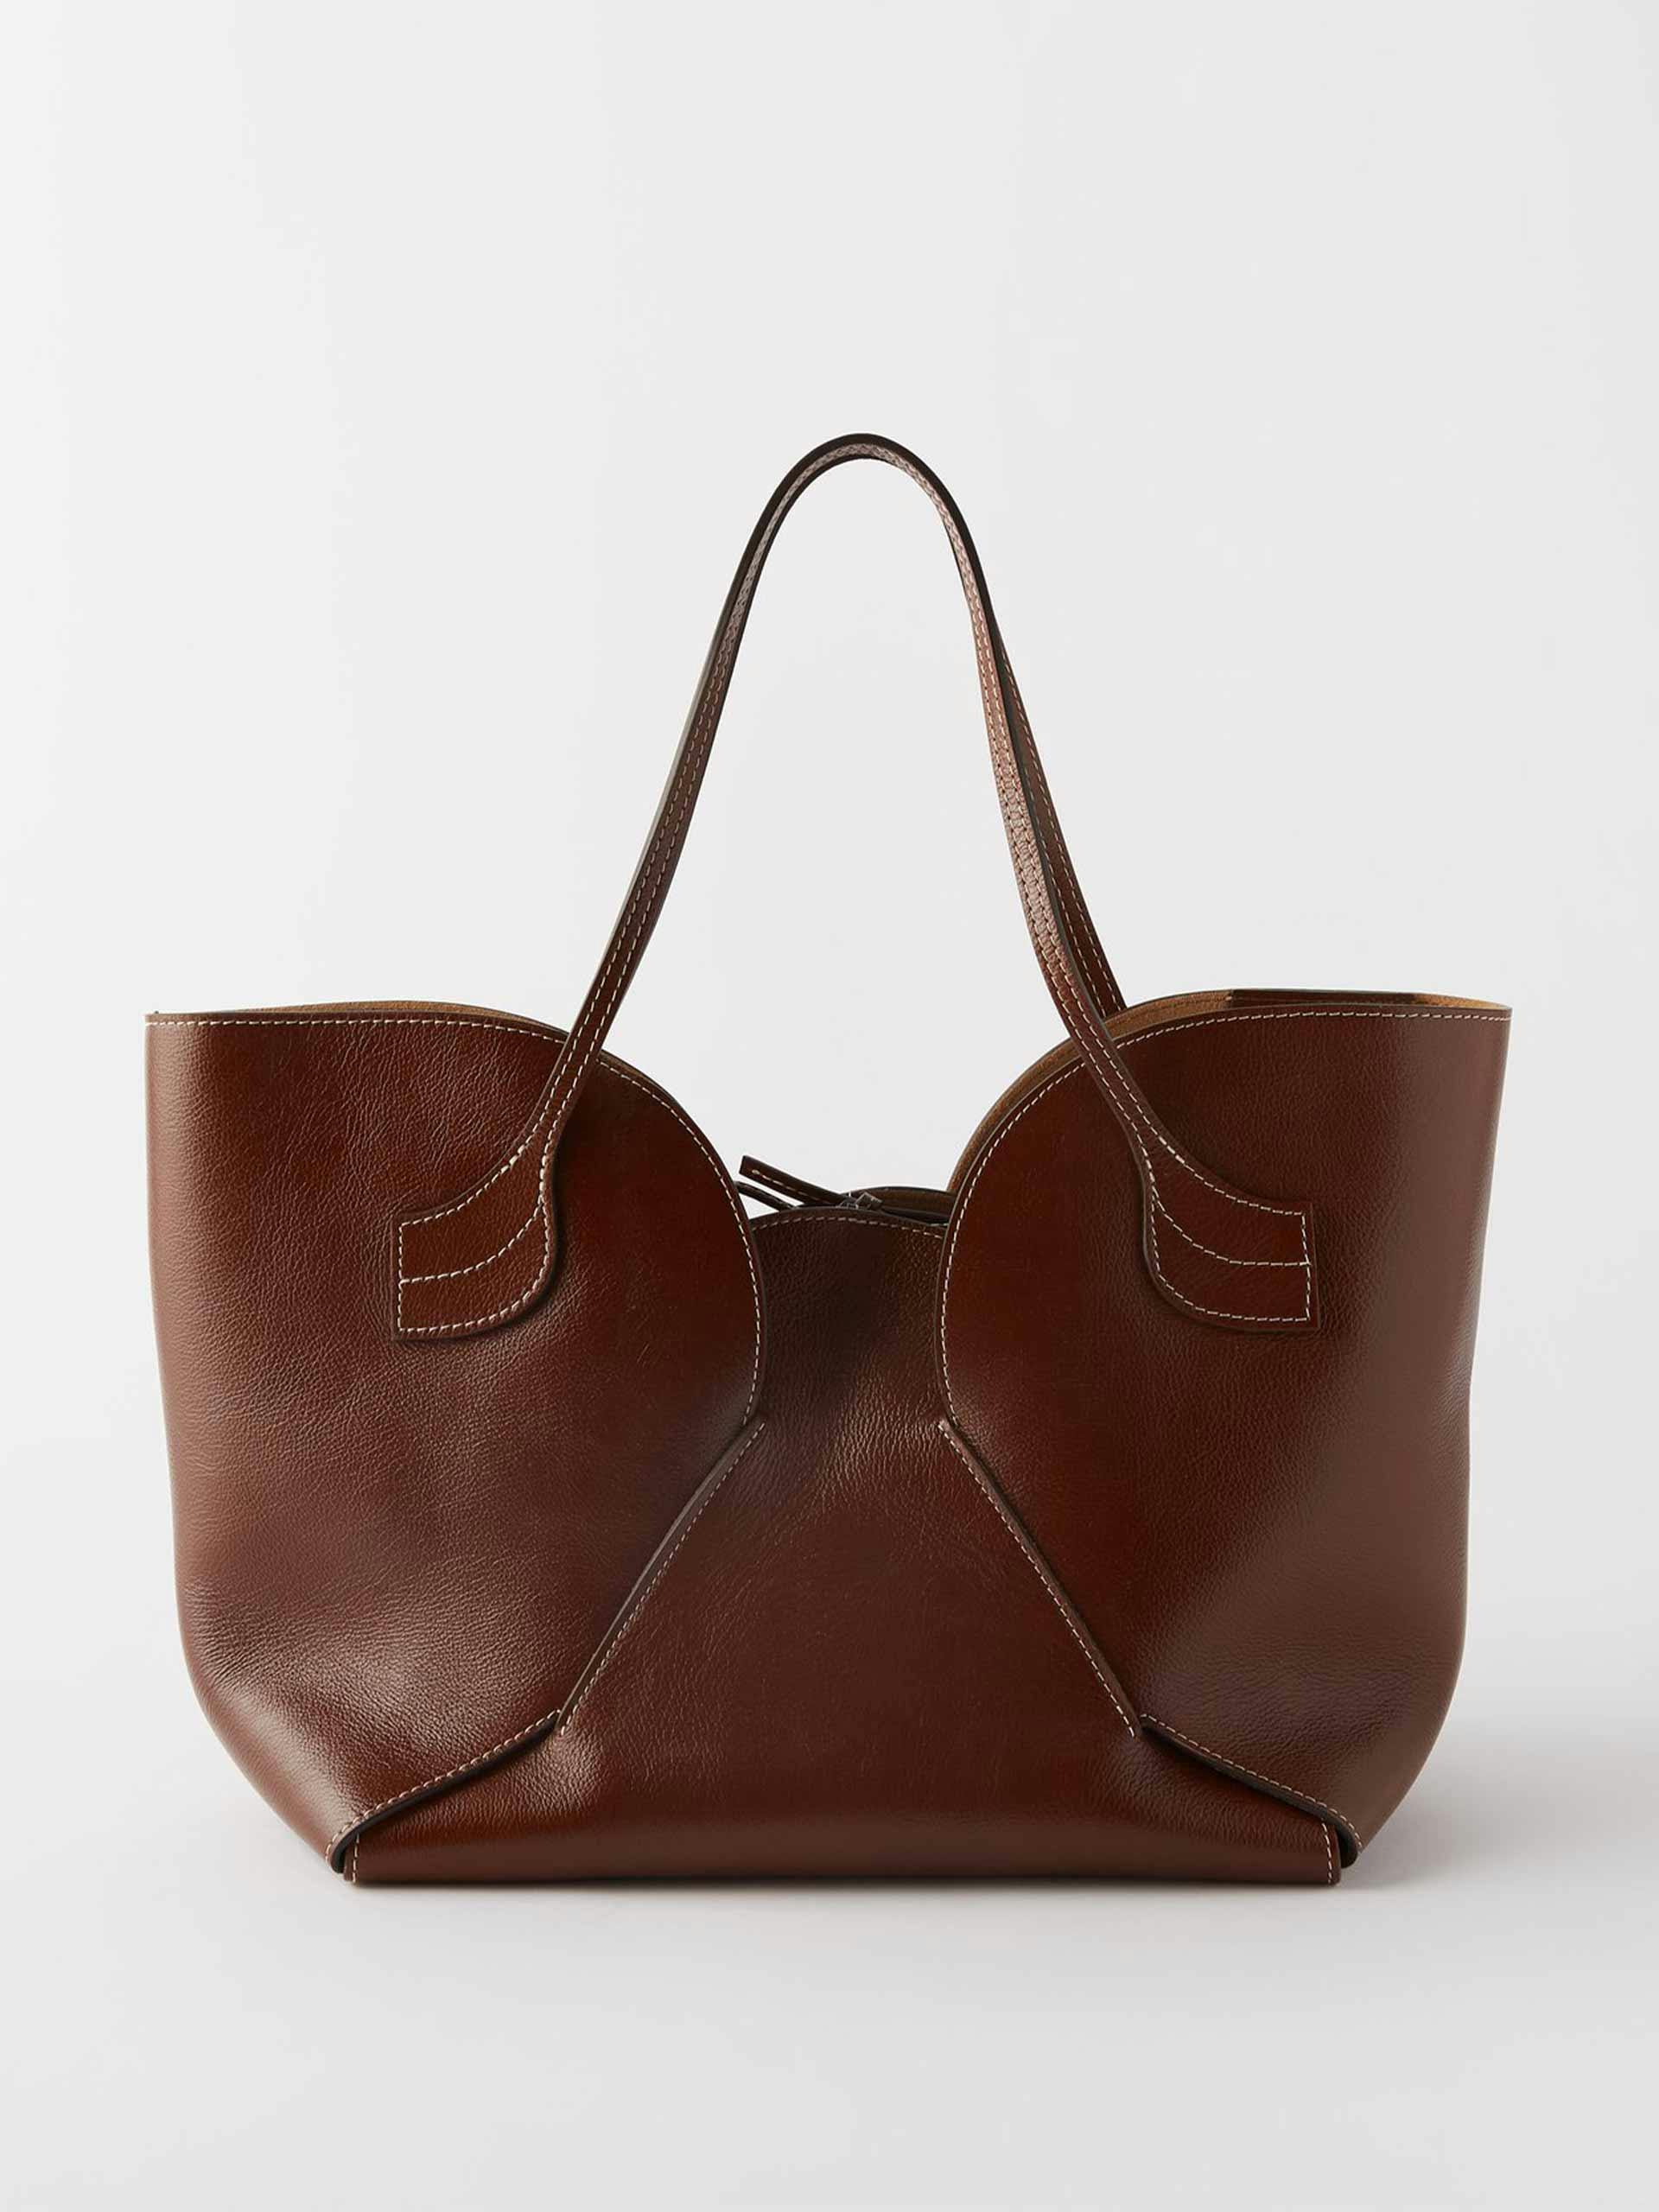 Sepal brown leather tote